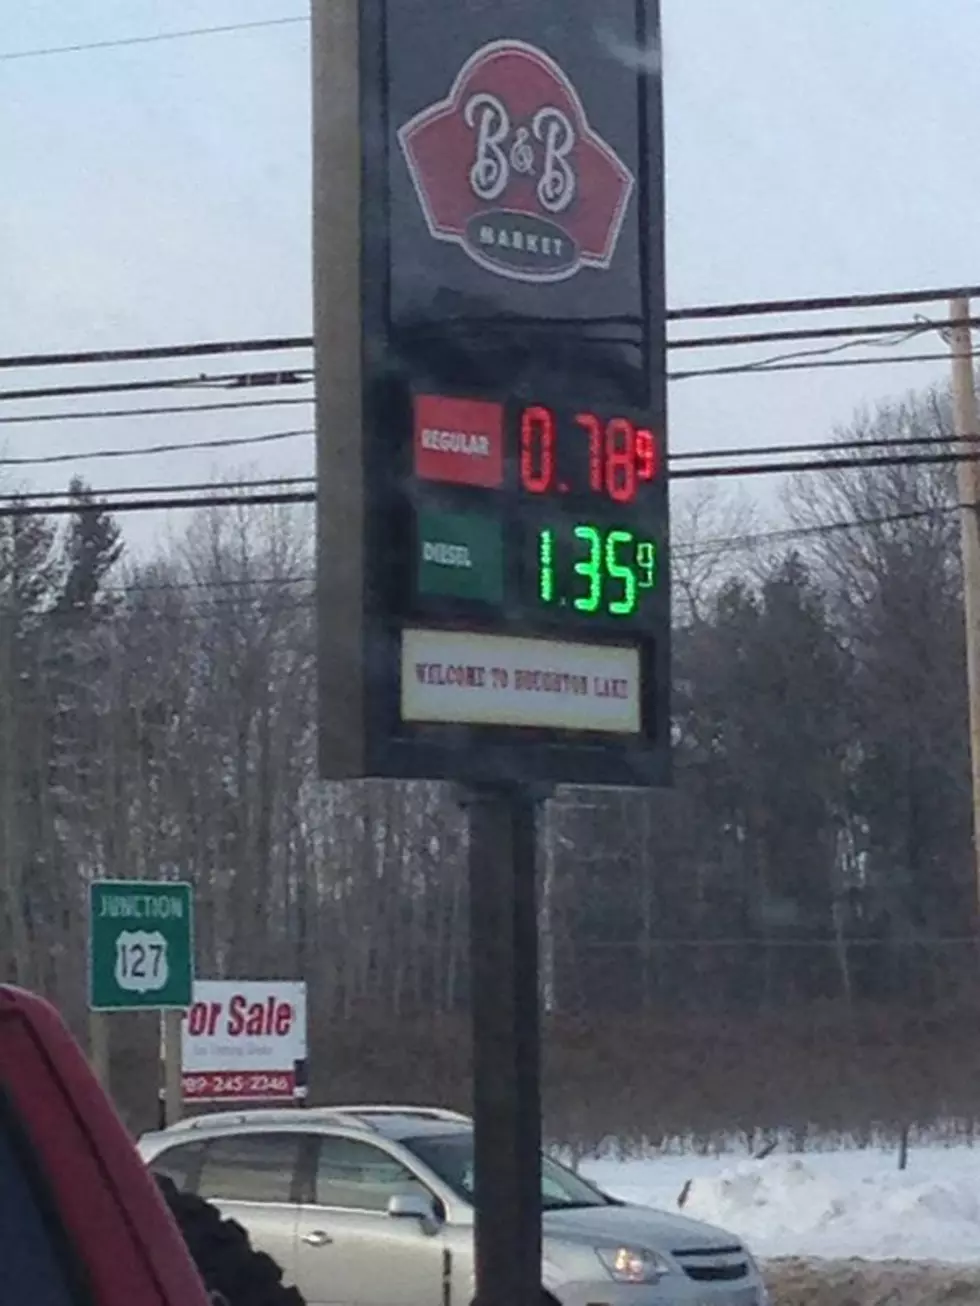 Houghton Lake Gas Prices Drop Below 50 Cents a Gallon Amid Gas War